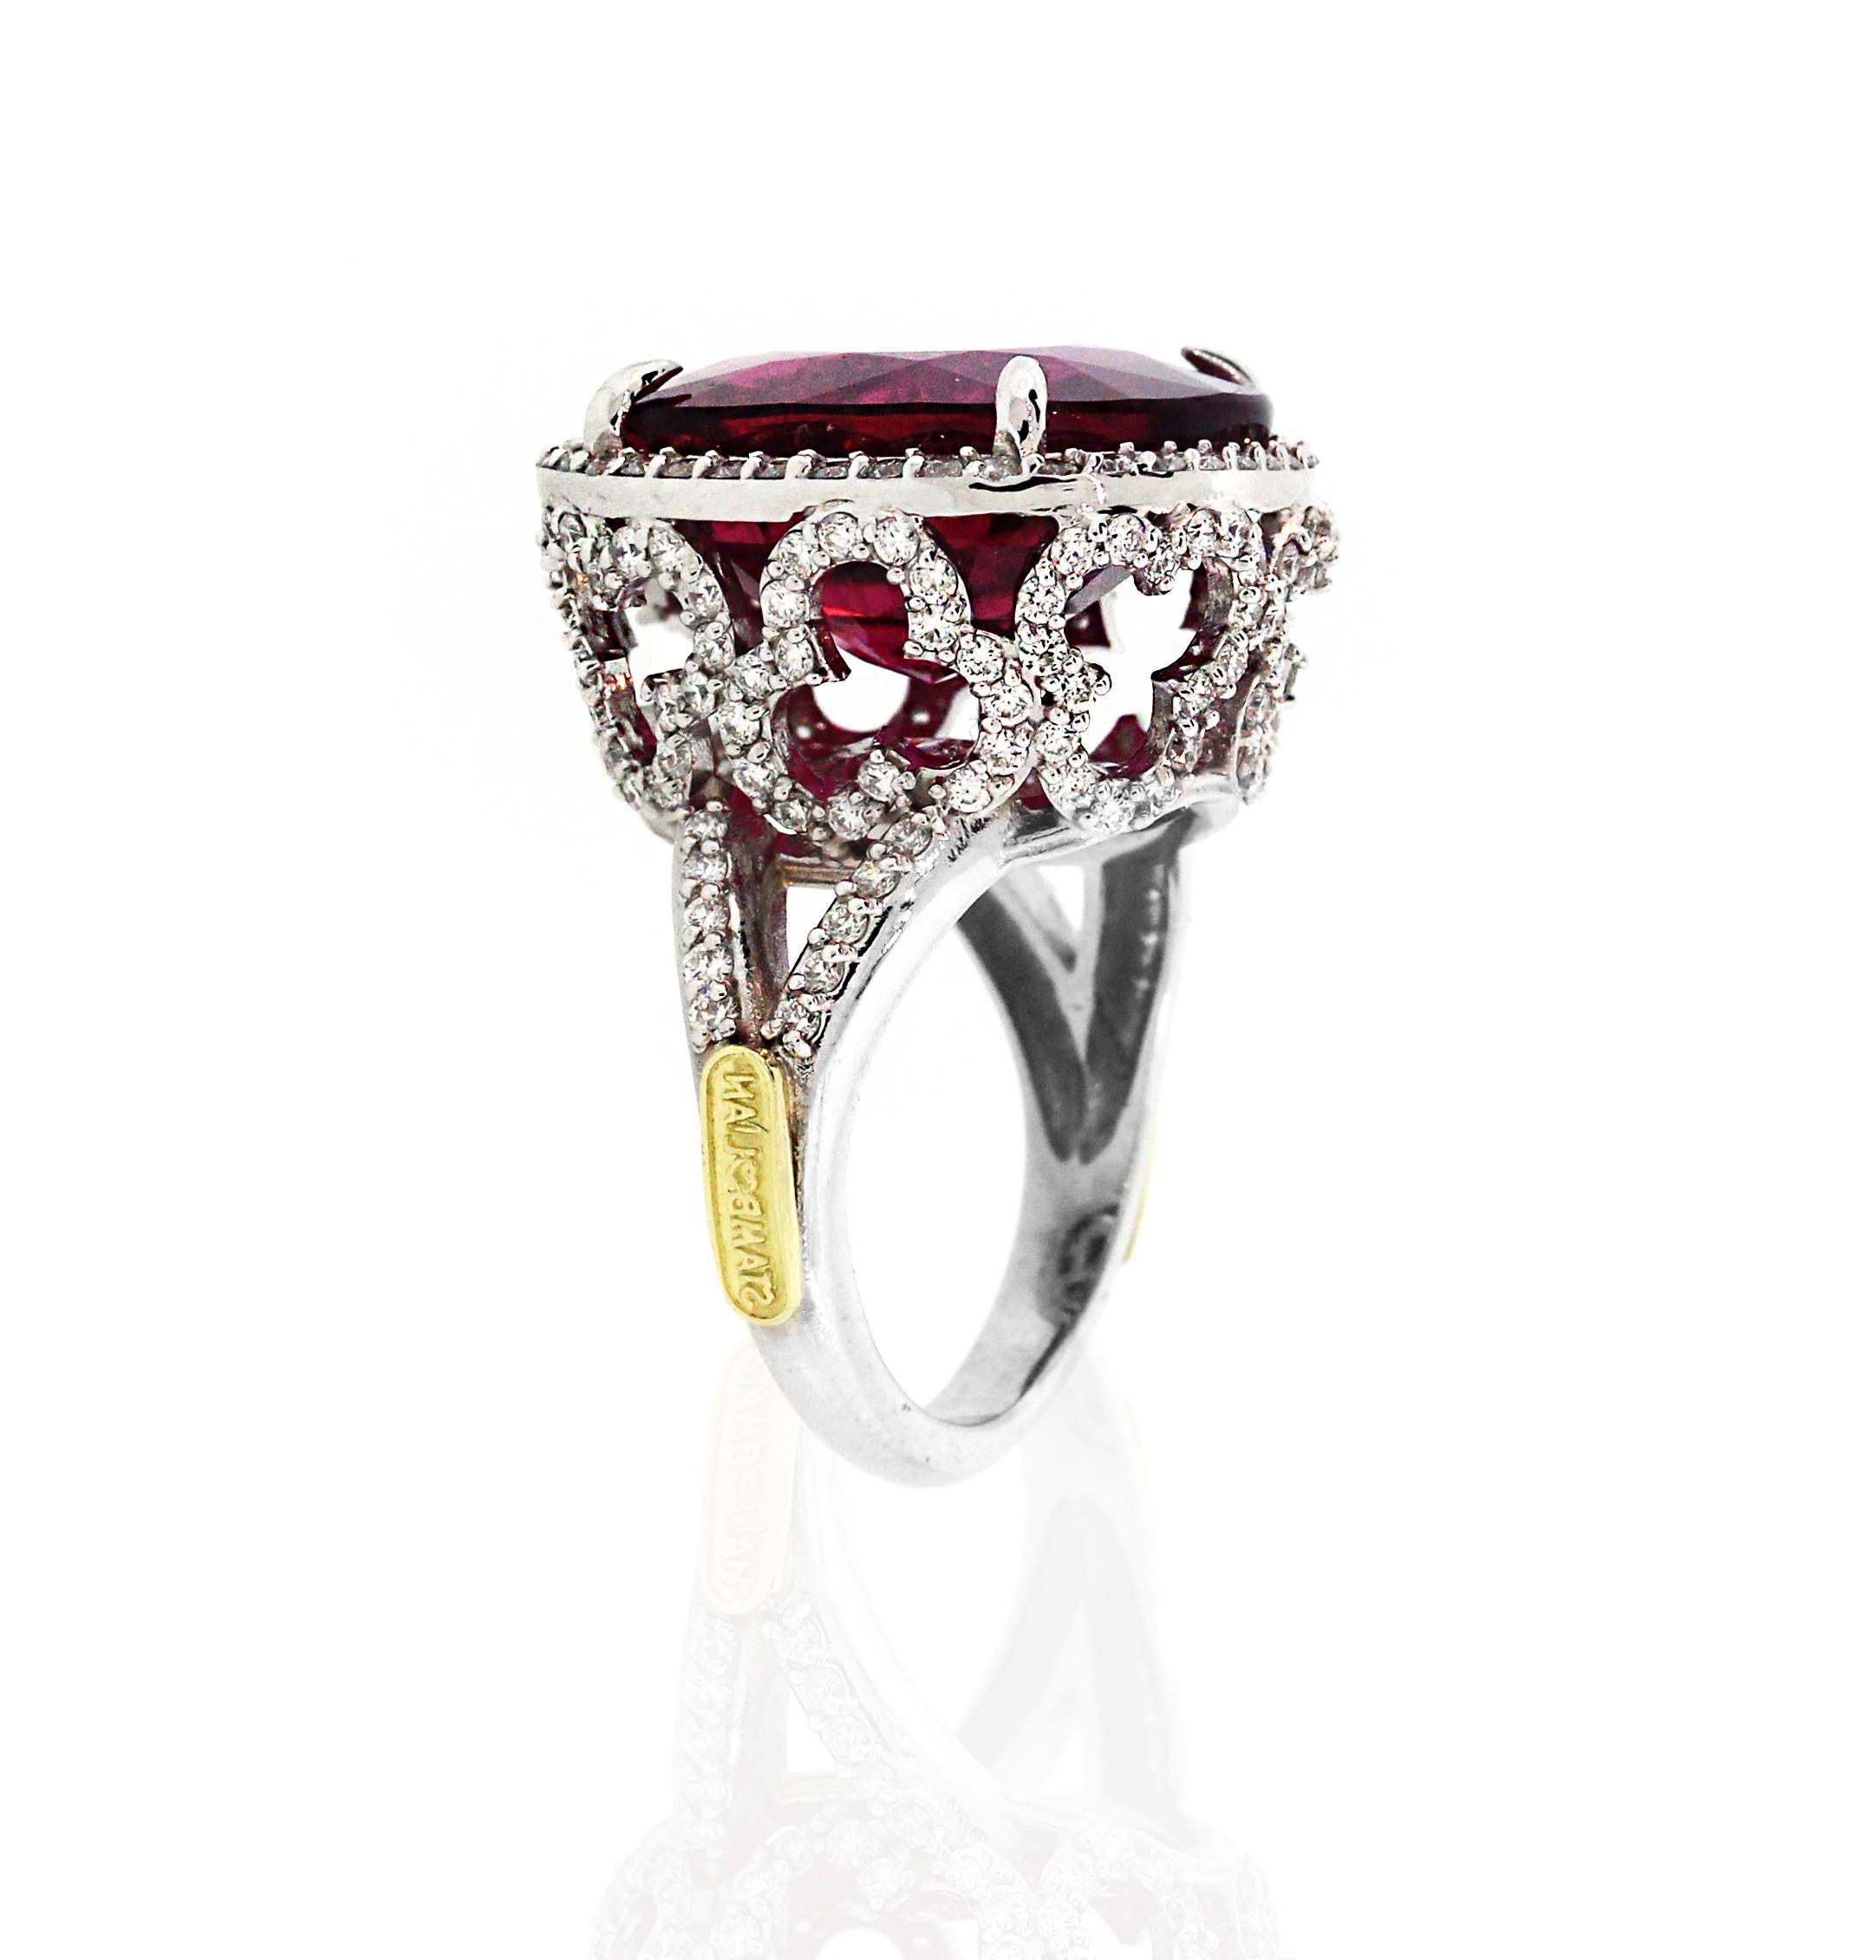 18K White Gold and Diamond Ring with Rubellite Tourmaline center by Stambolian

18.55 carat Collectors Quality Rubellite Tourmaline center

This one-of-a-kind Ring has floral design work all throughout

1.63 carat G color, VS clarity diamonds

Ring